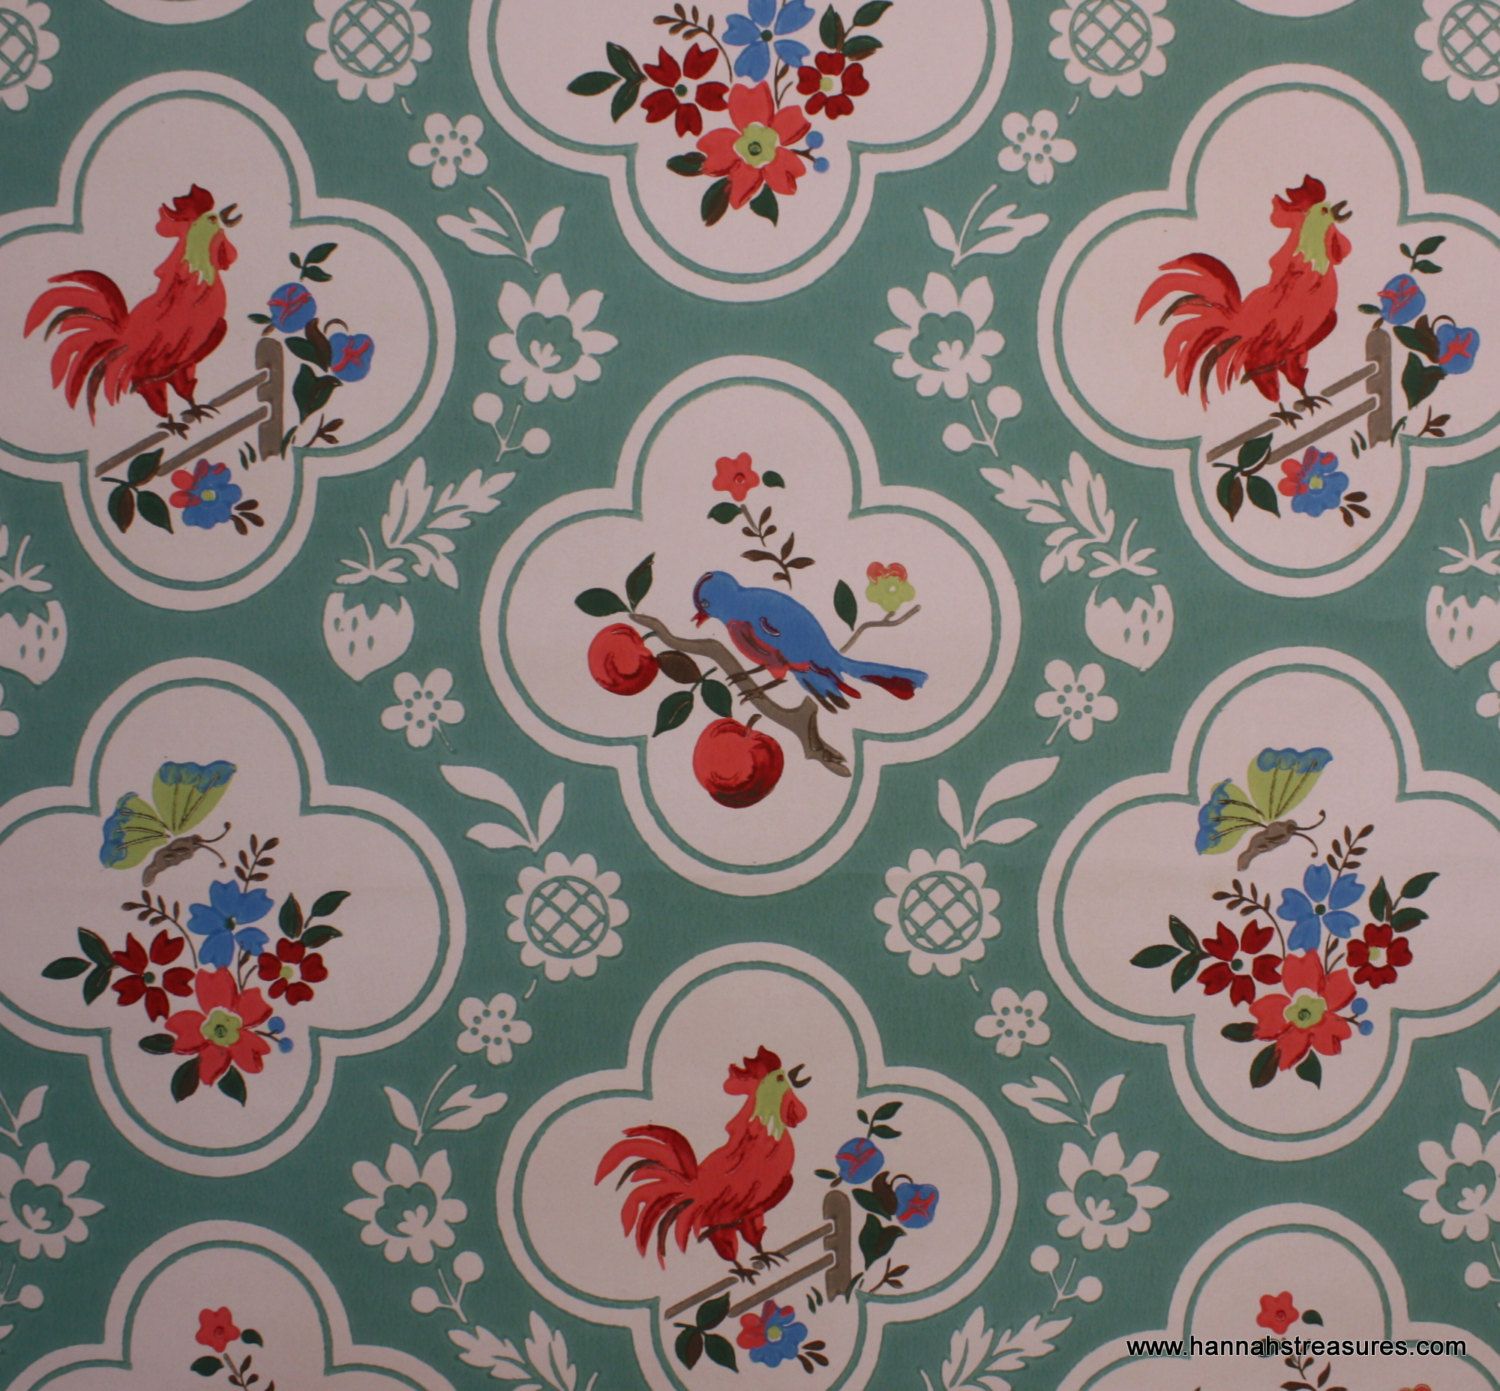 1940's Vintage Wallpaper Red and Aqua with birds cherries roosters butterfly. $14. via Etsy. Vintage wallpaper, Pattern wallpaper, Retro wallpaper